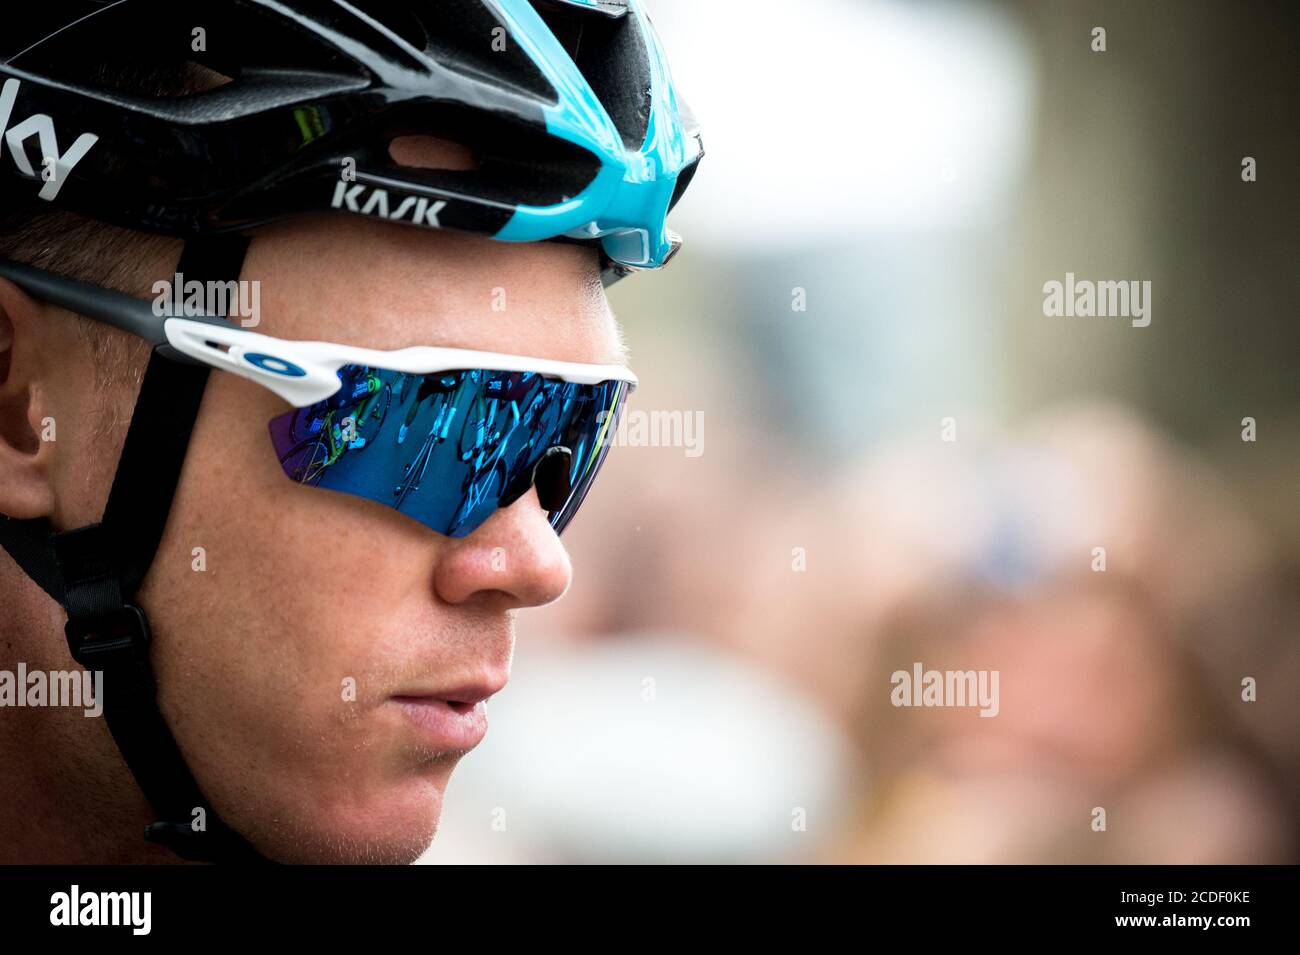 02.07.2016. Saumur, France. Tour de France stage 4 from Saumur to Limoges. Chris Froome focused at the start of the stage. Stock Photo